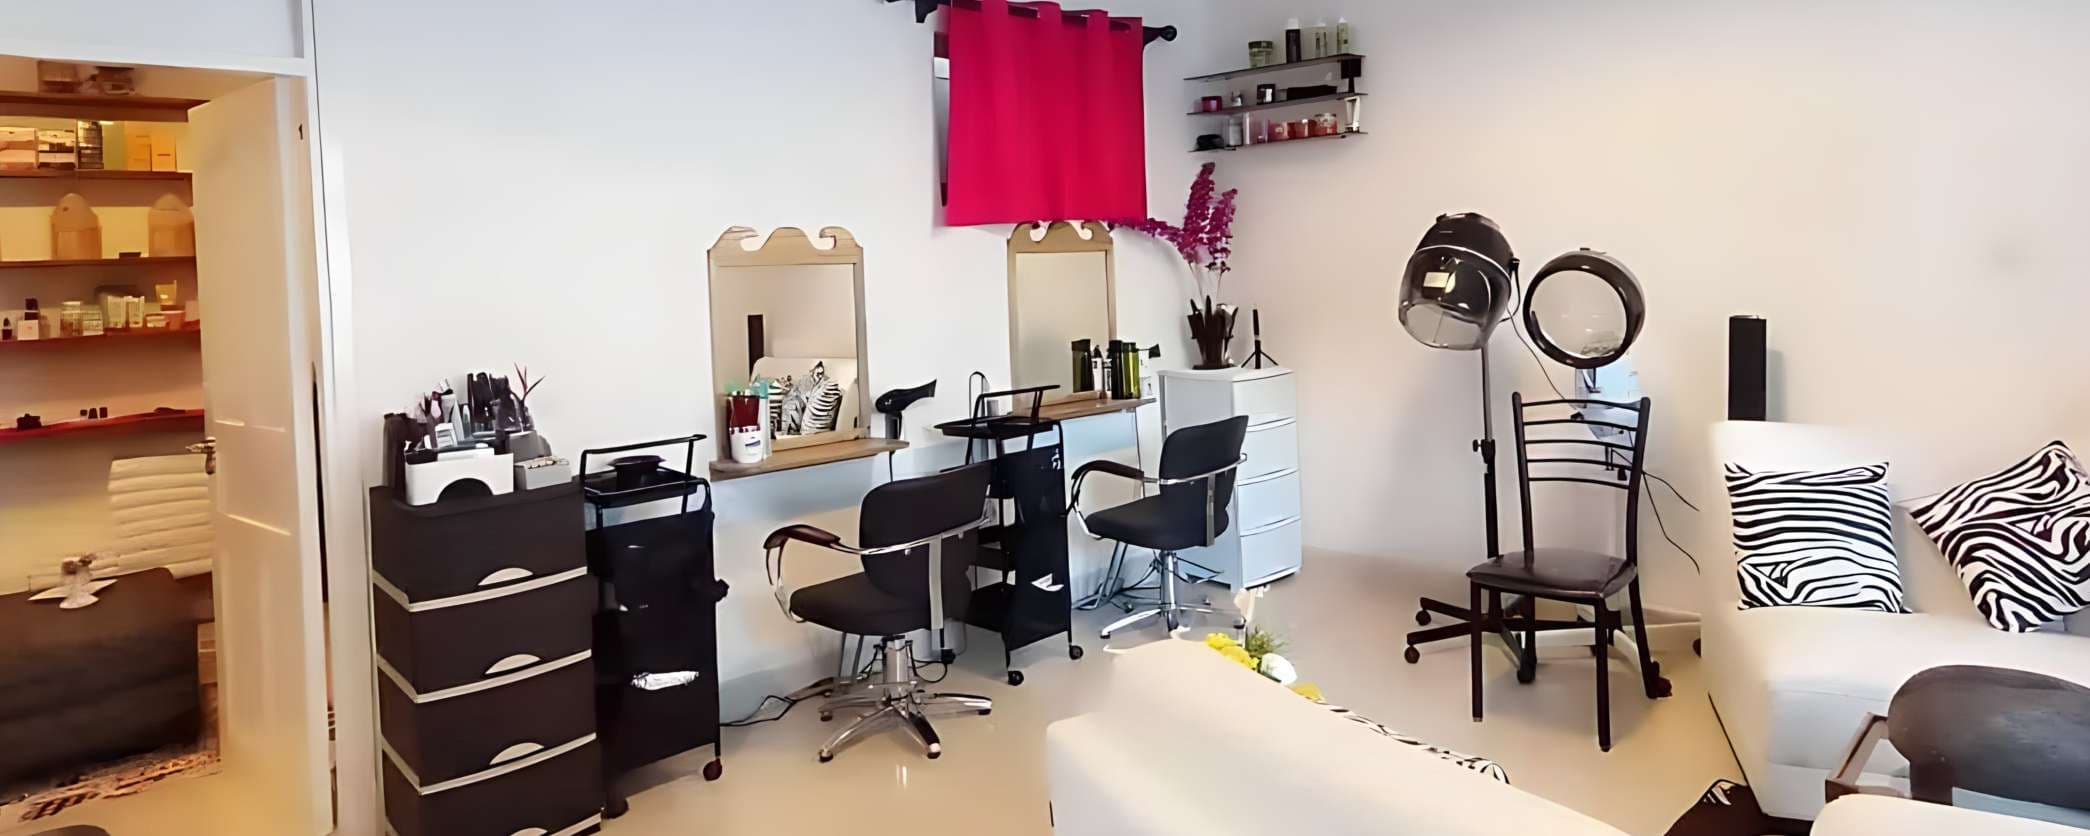 One Stop Beauty & Outfits Parlor